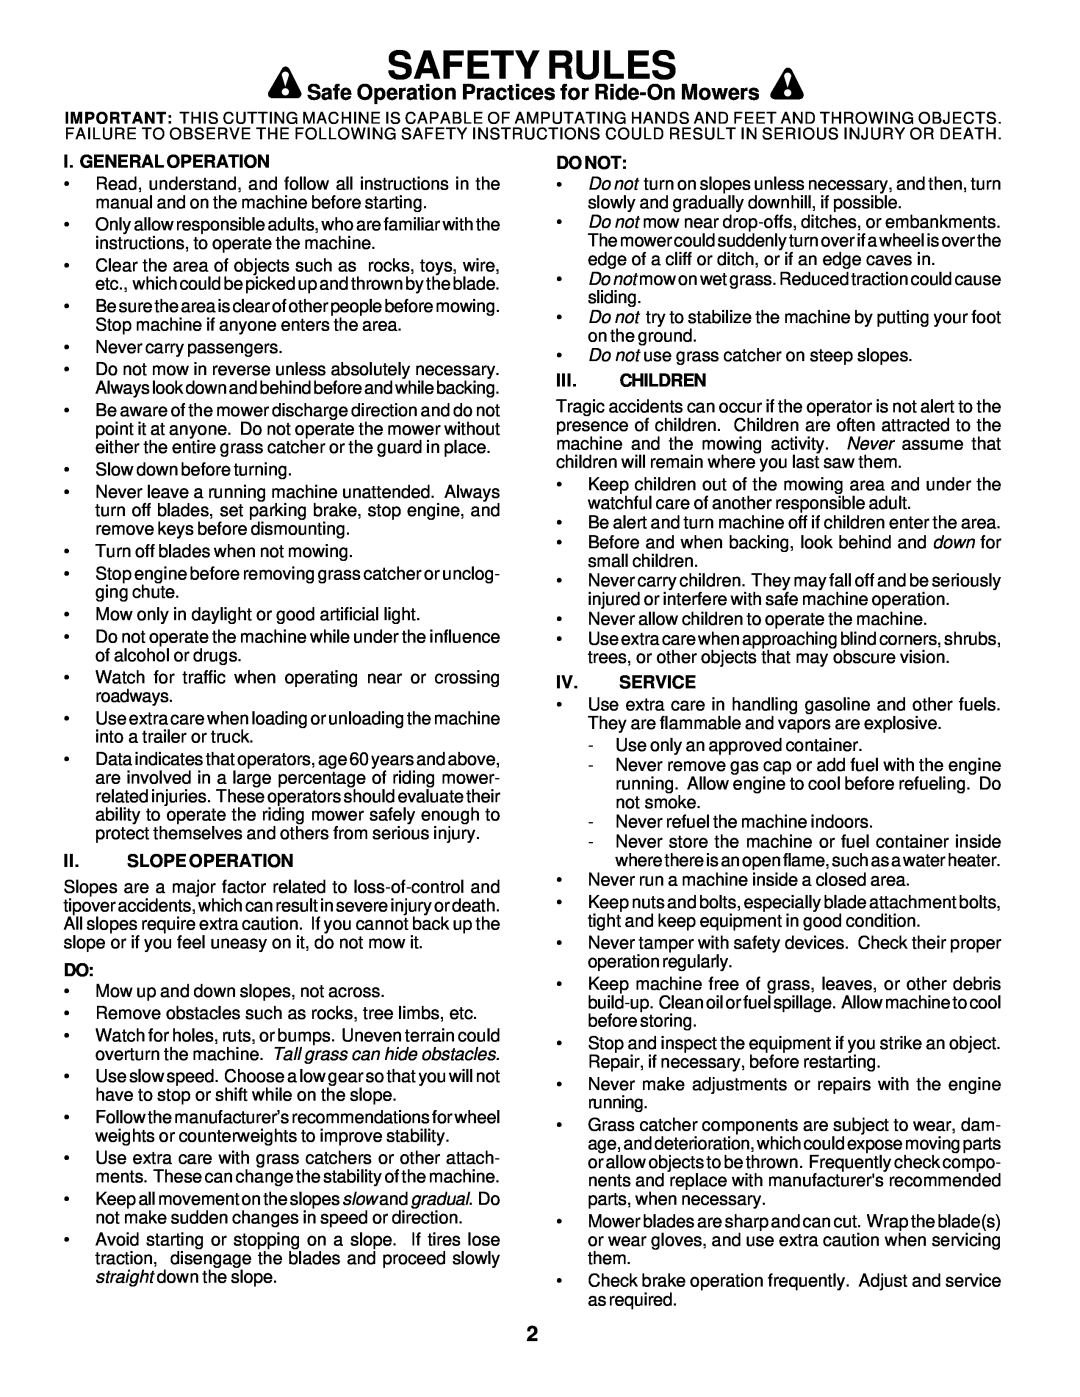 Poulan PR17H42STC, 178219 owner manual Safety Rules, Safe Operation Practices for Ride-OnMowers 